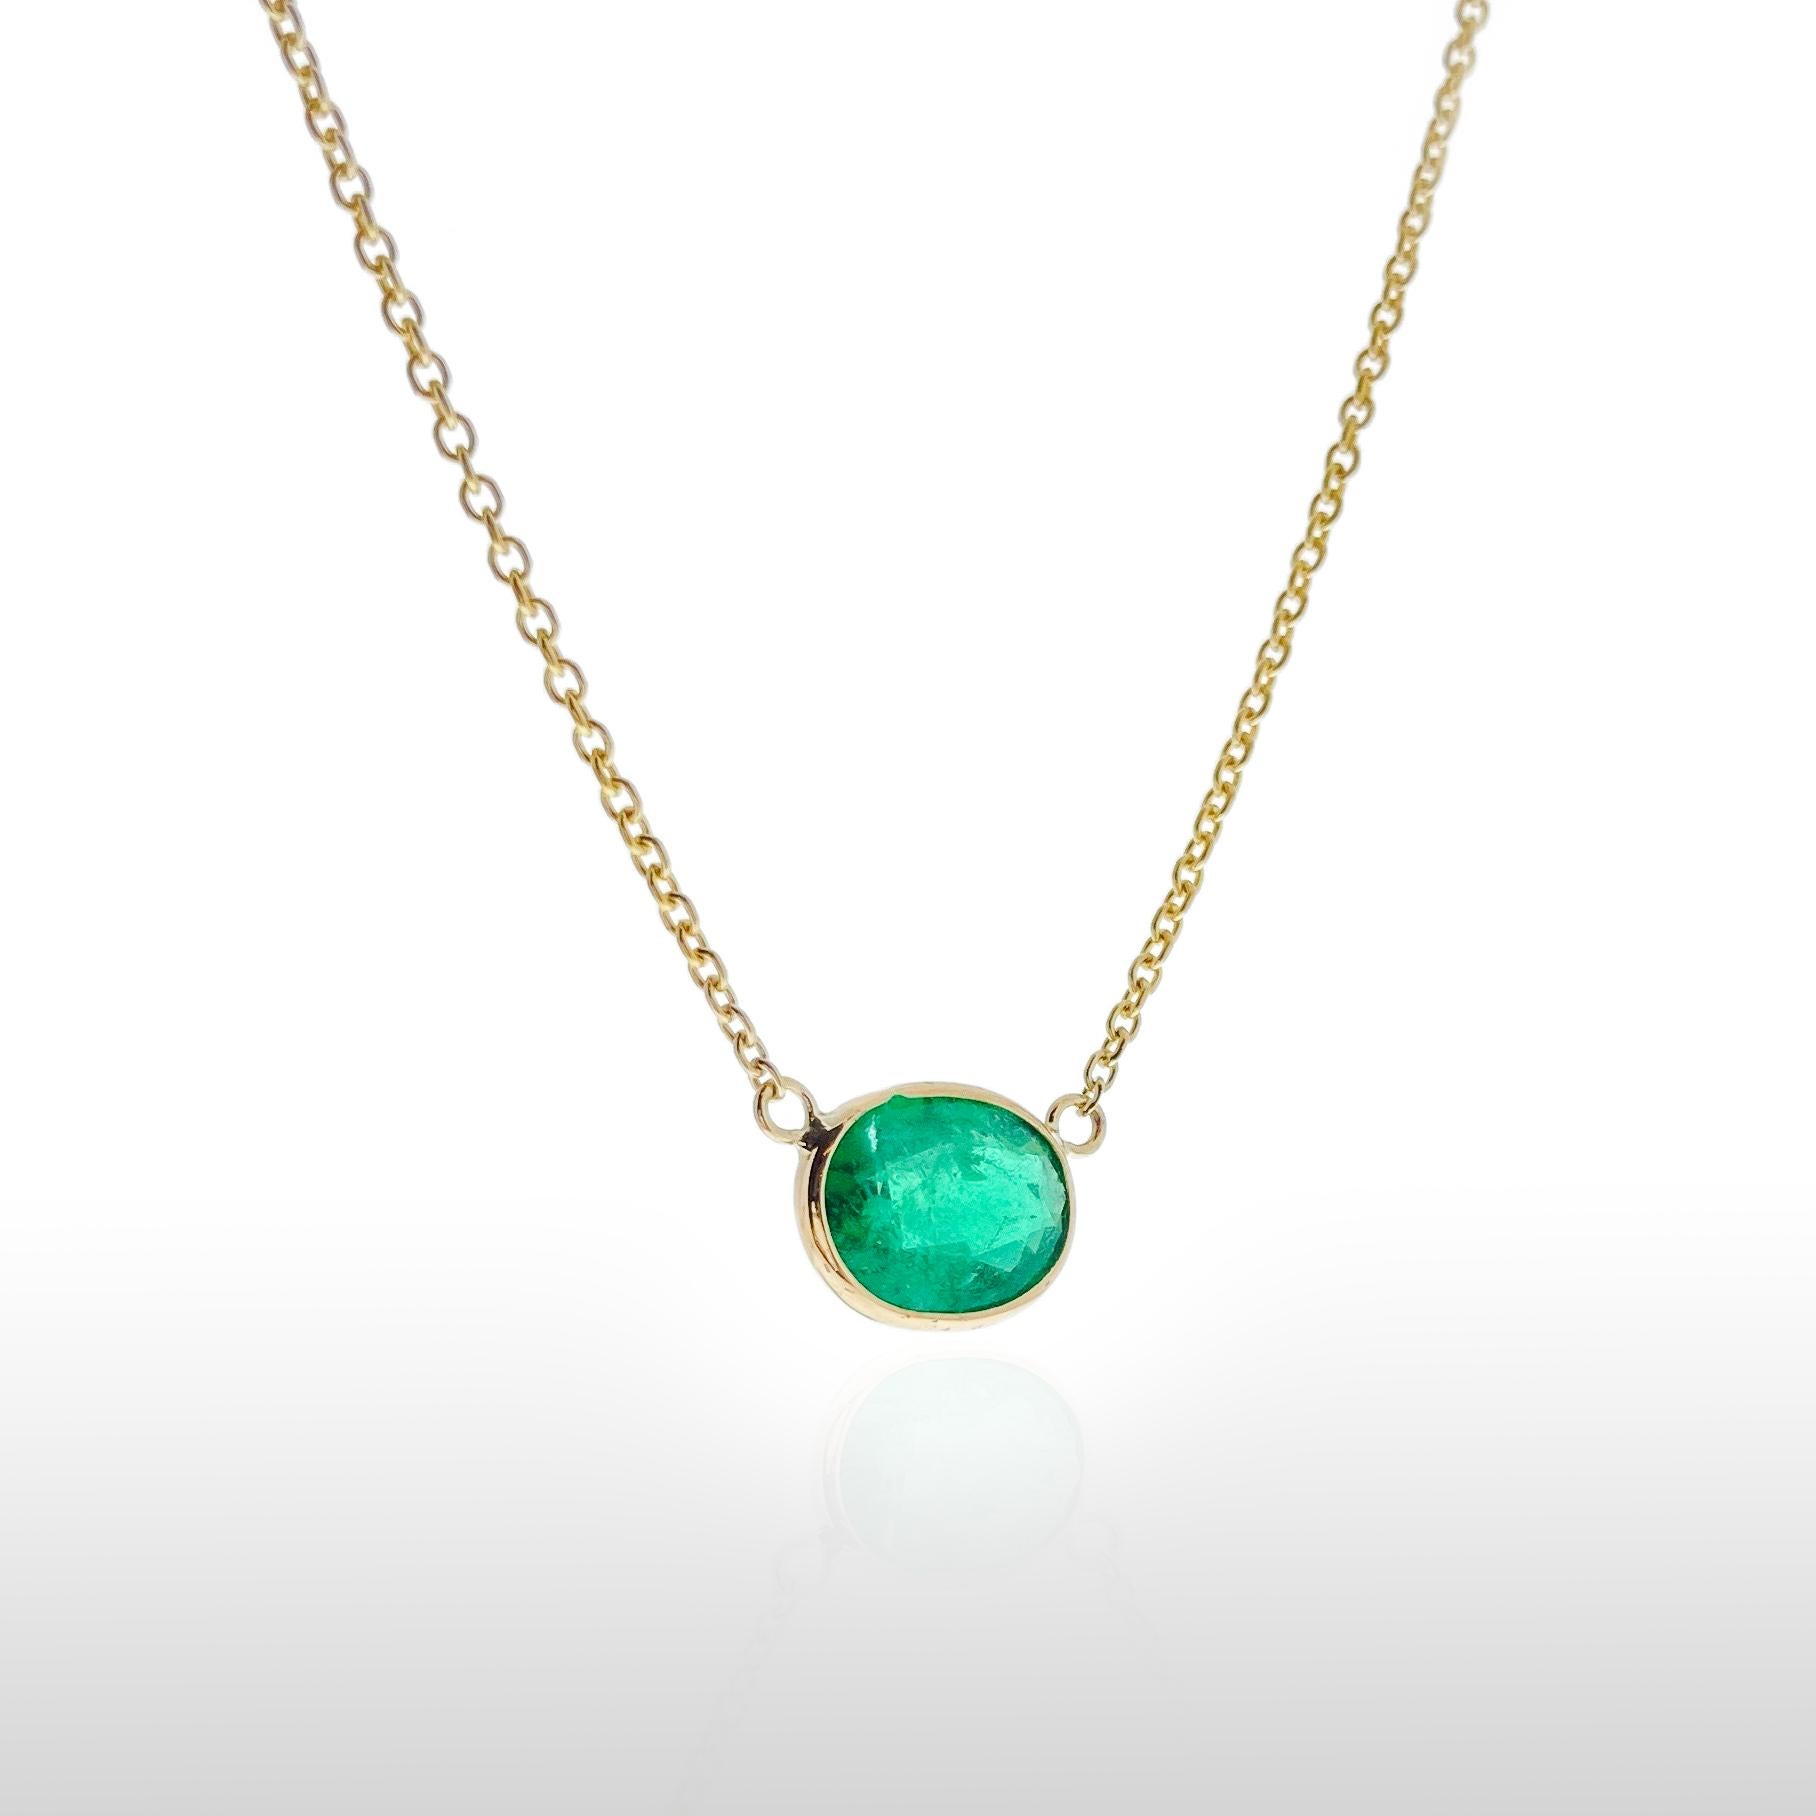 This necklace features an oval-cut green emerald with a weight of 1.44 carats, set in 14k yellow gold (YG). Emeralds are well-known for their rich green color, and the oval cut is a classic and timeless choice for gemstones, offering an elegant and